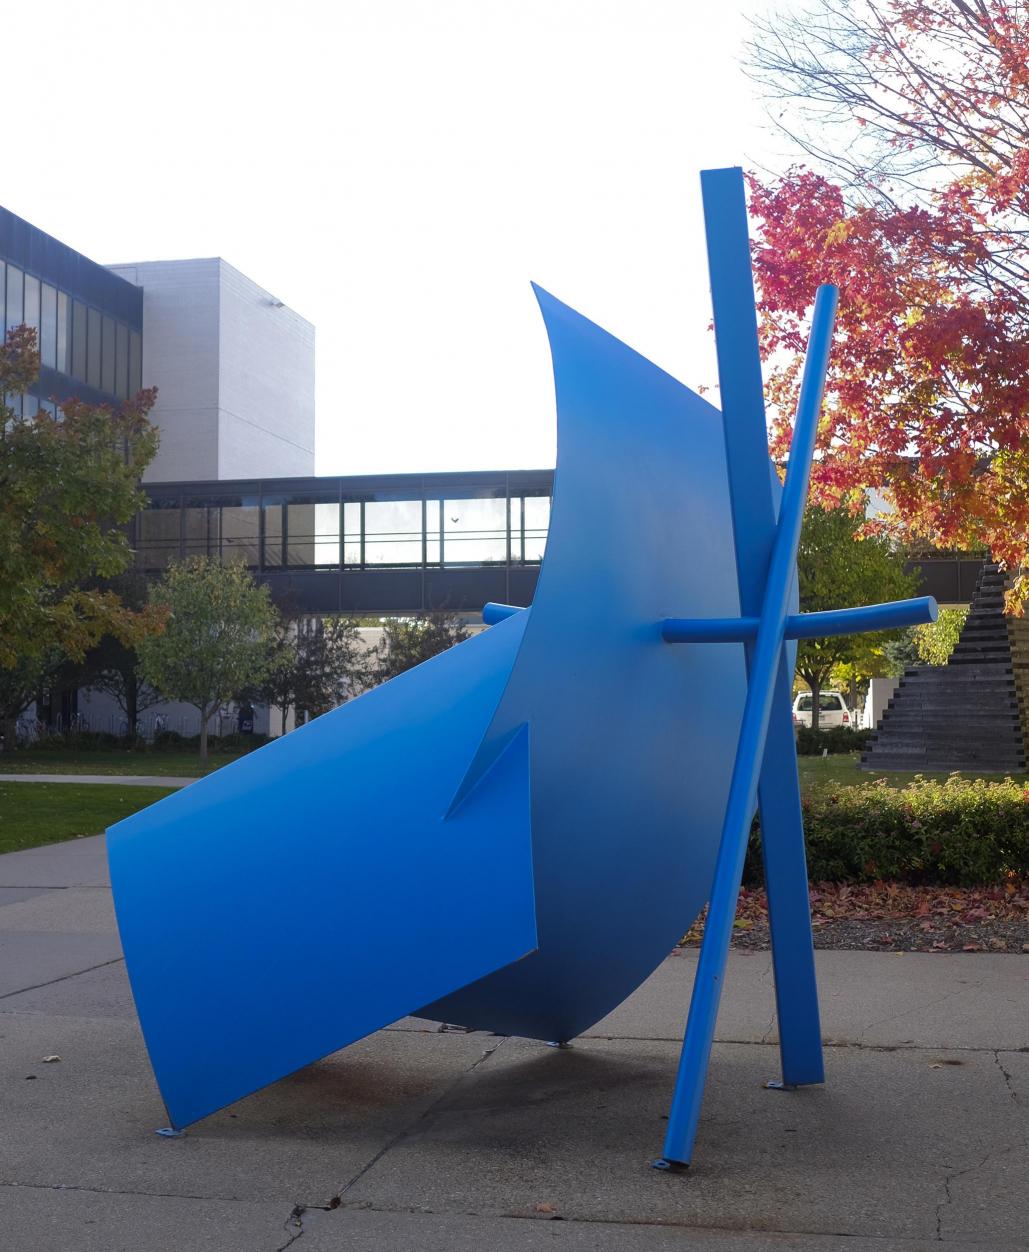 Blue Hondo (2001) by faculty emeritus Michael Bigger; on long-term loan to MCAD from Bigger's widow, Barbee